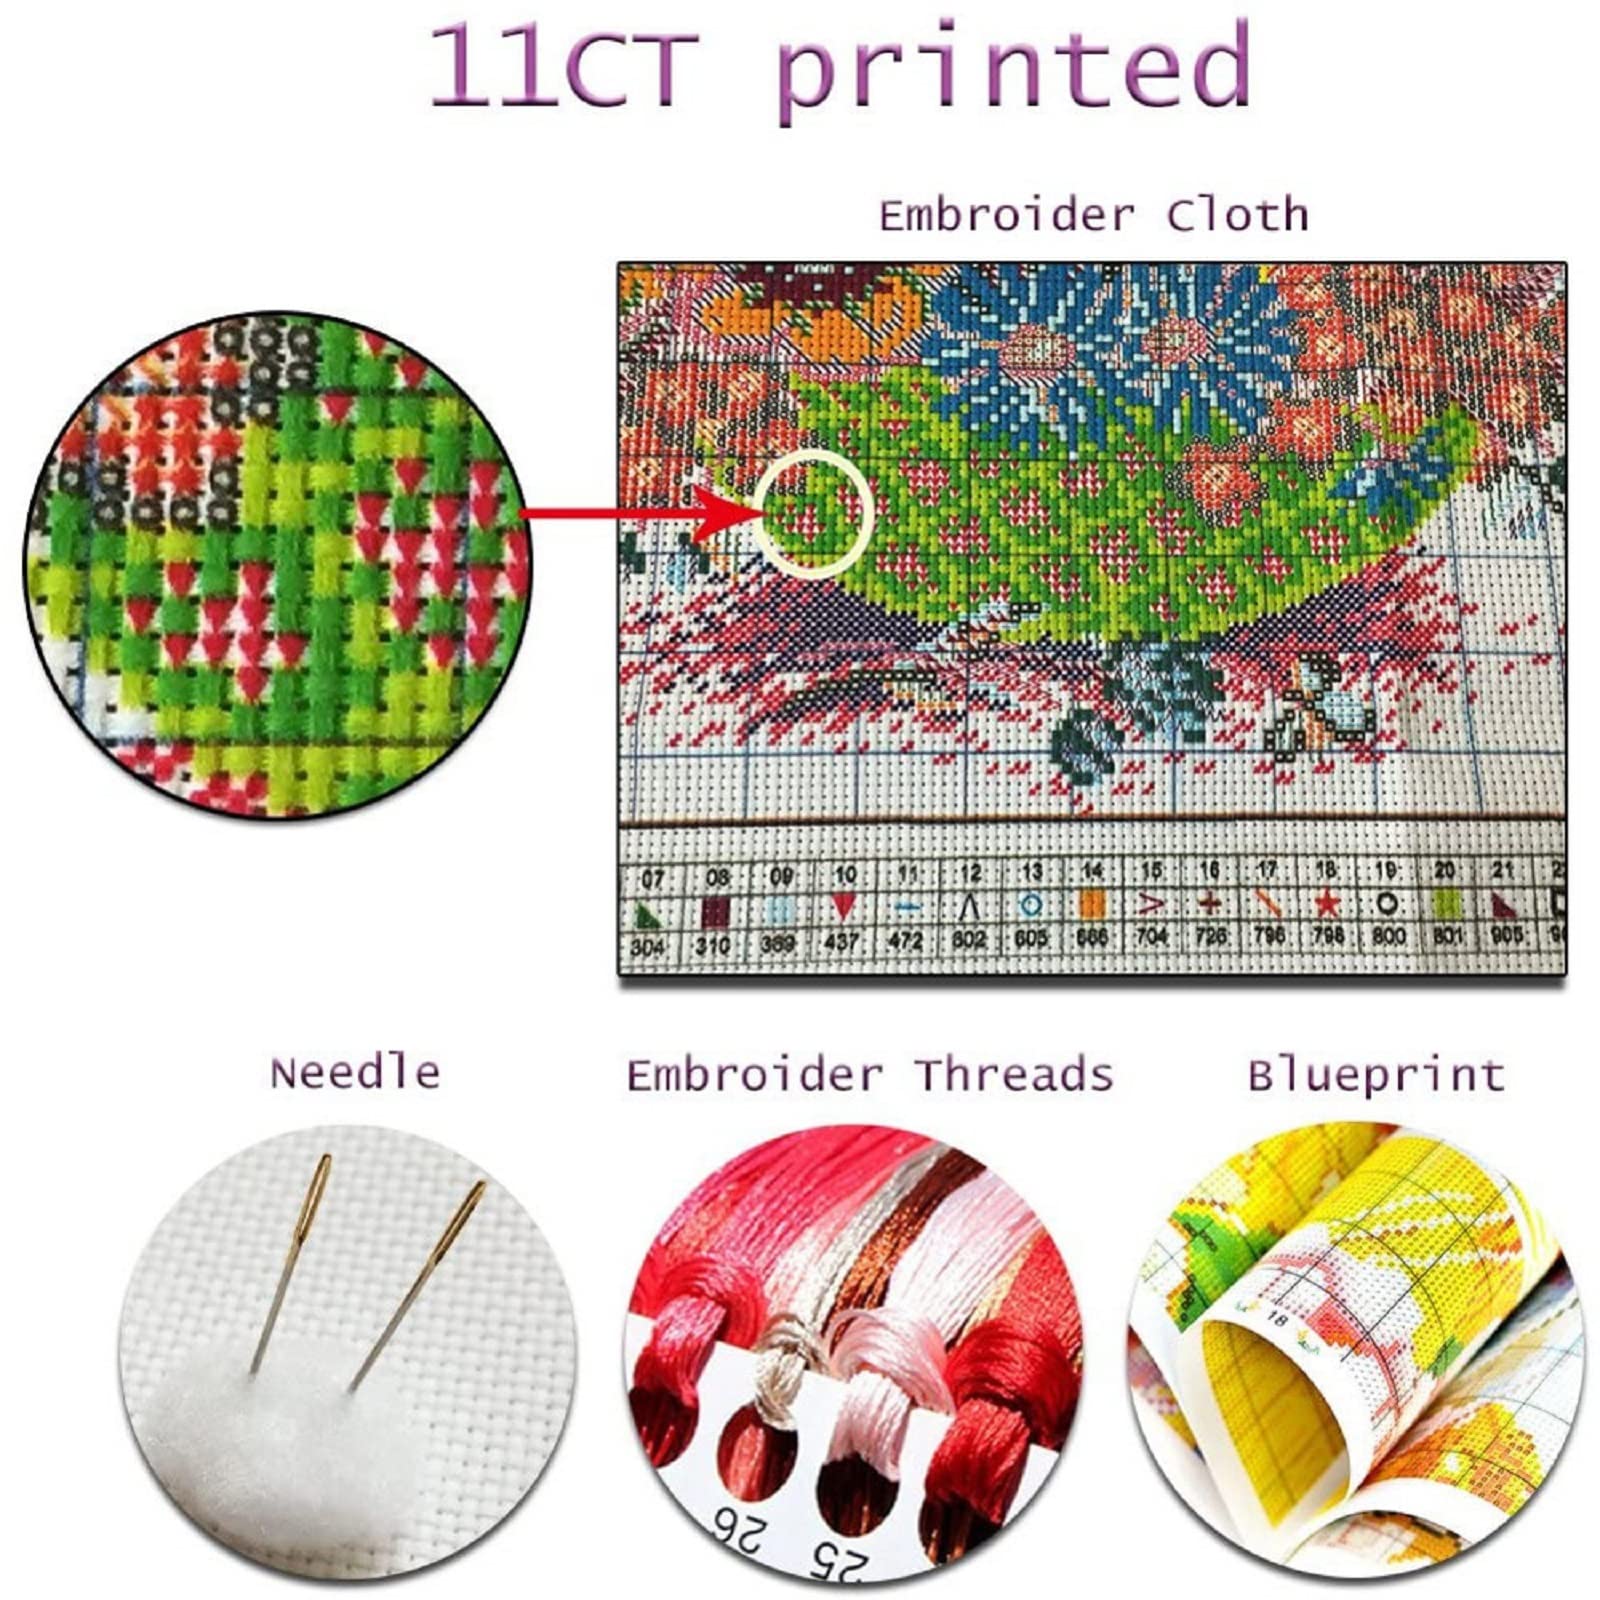 Redxing Stamped Cross Stitch Kits Embroidery kit for Beginners